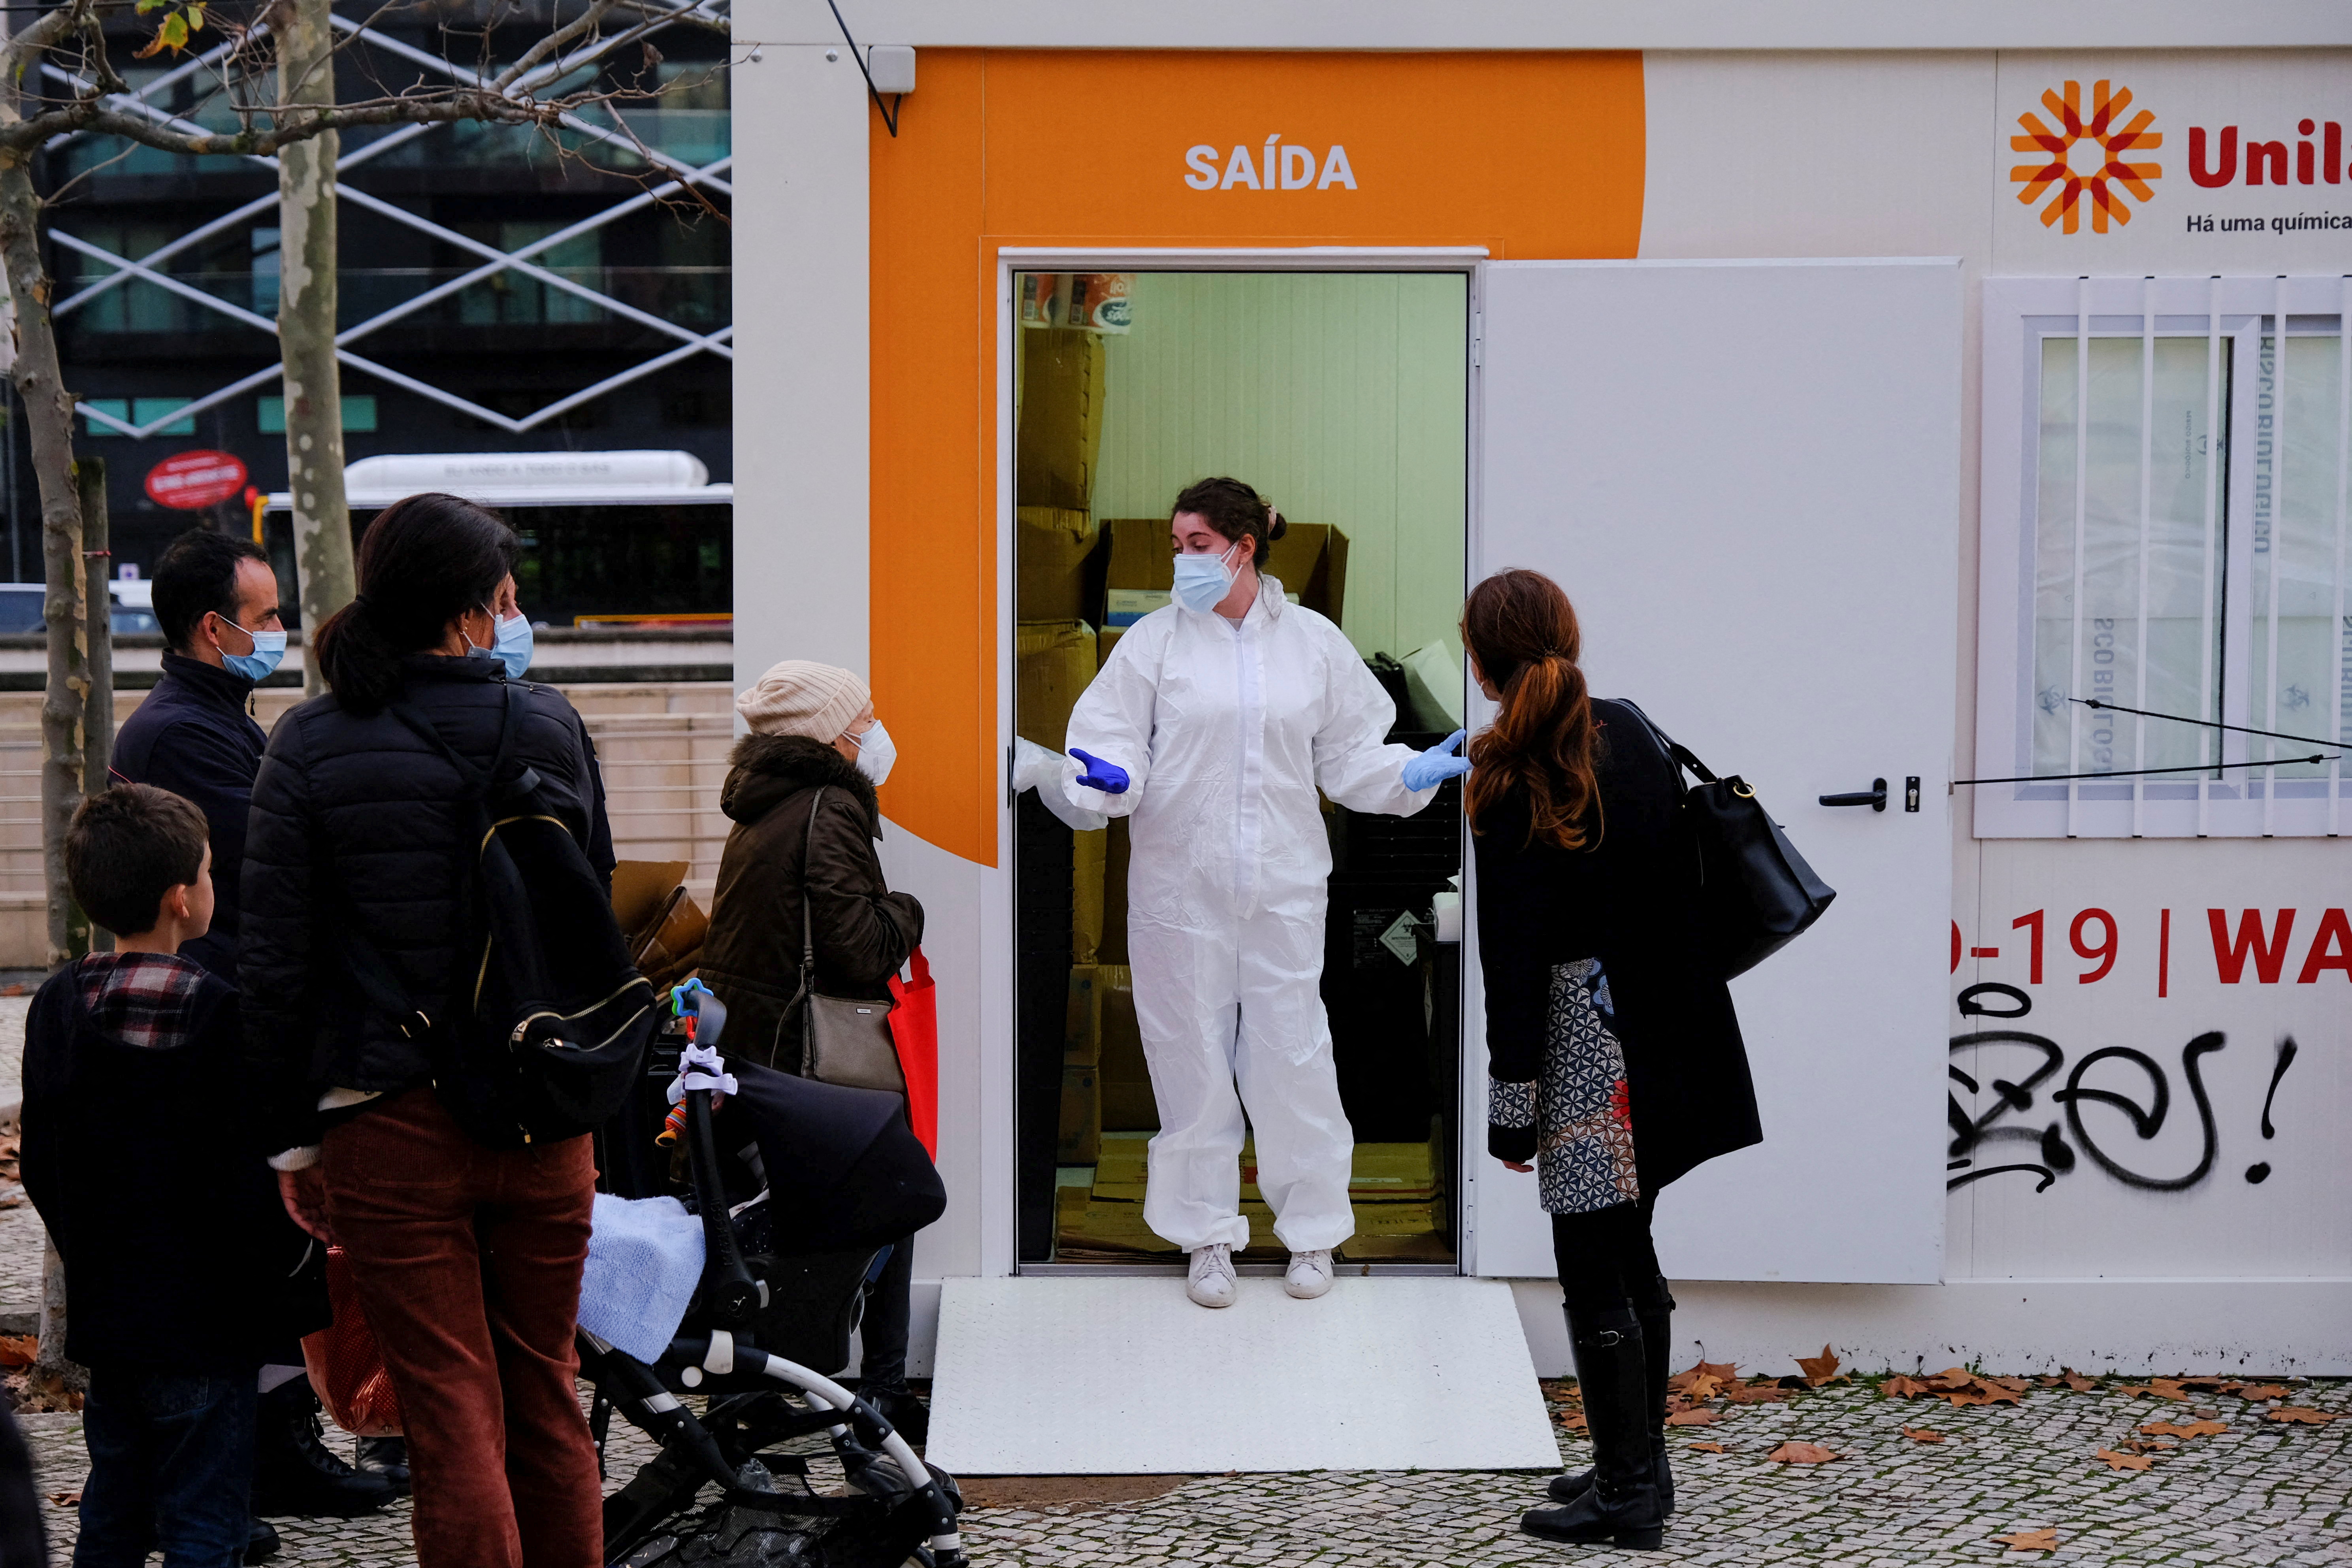 Lisbon residents rush for COVID-19 tests ahead of Christmas